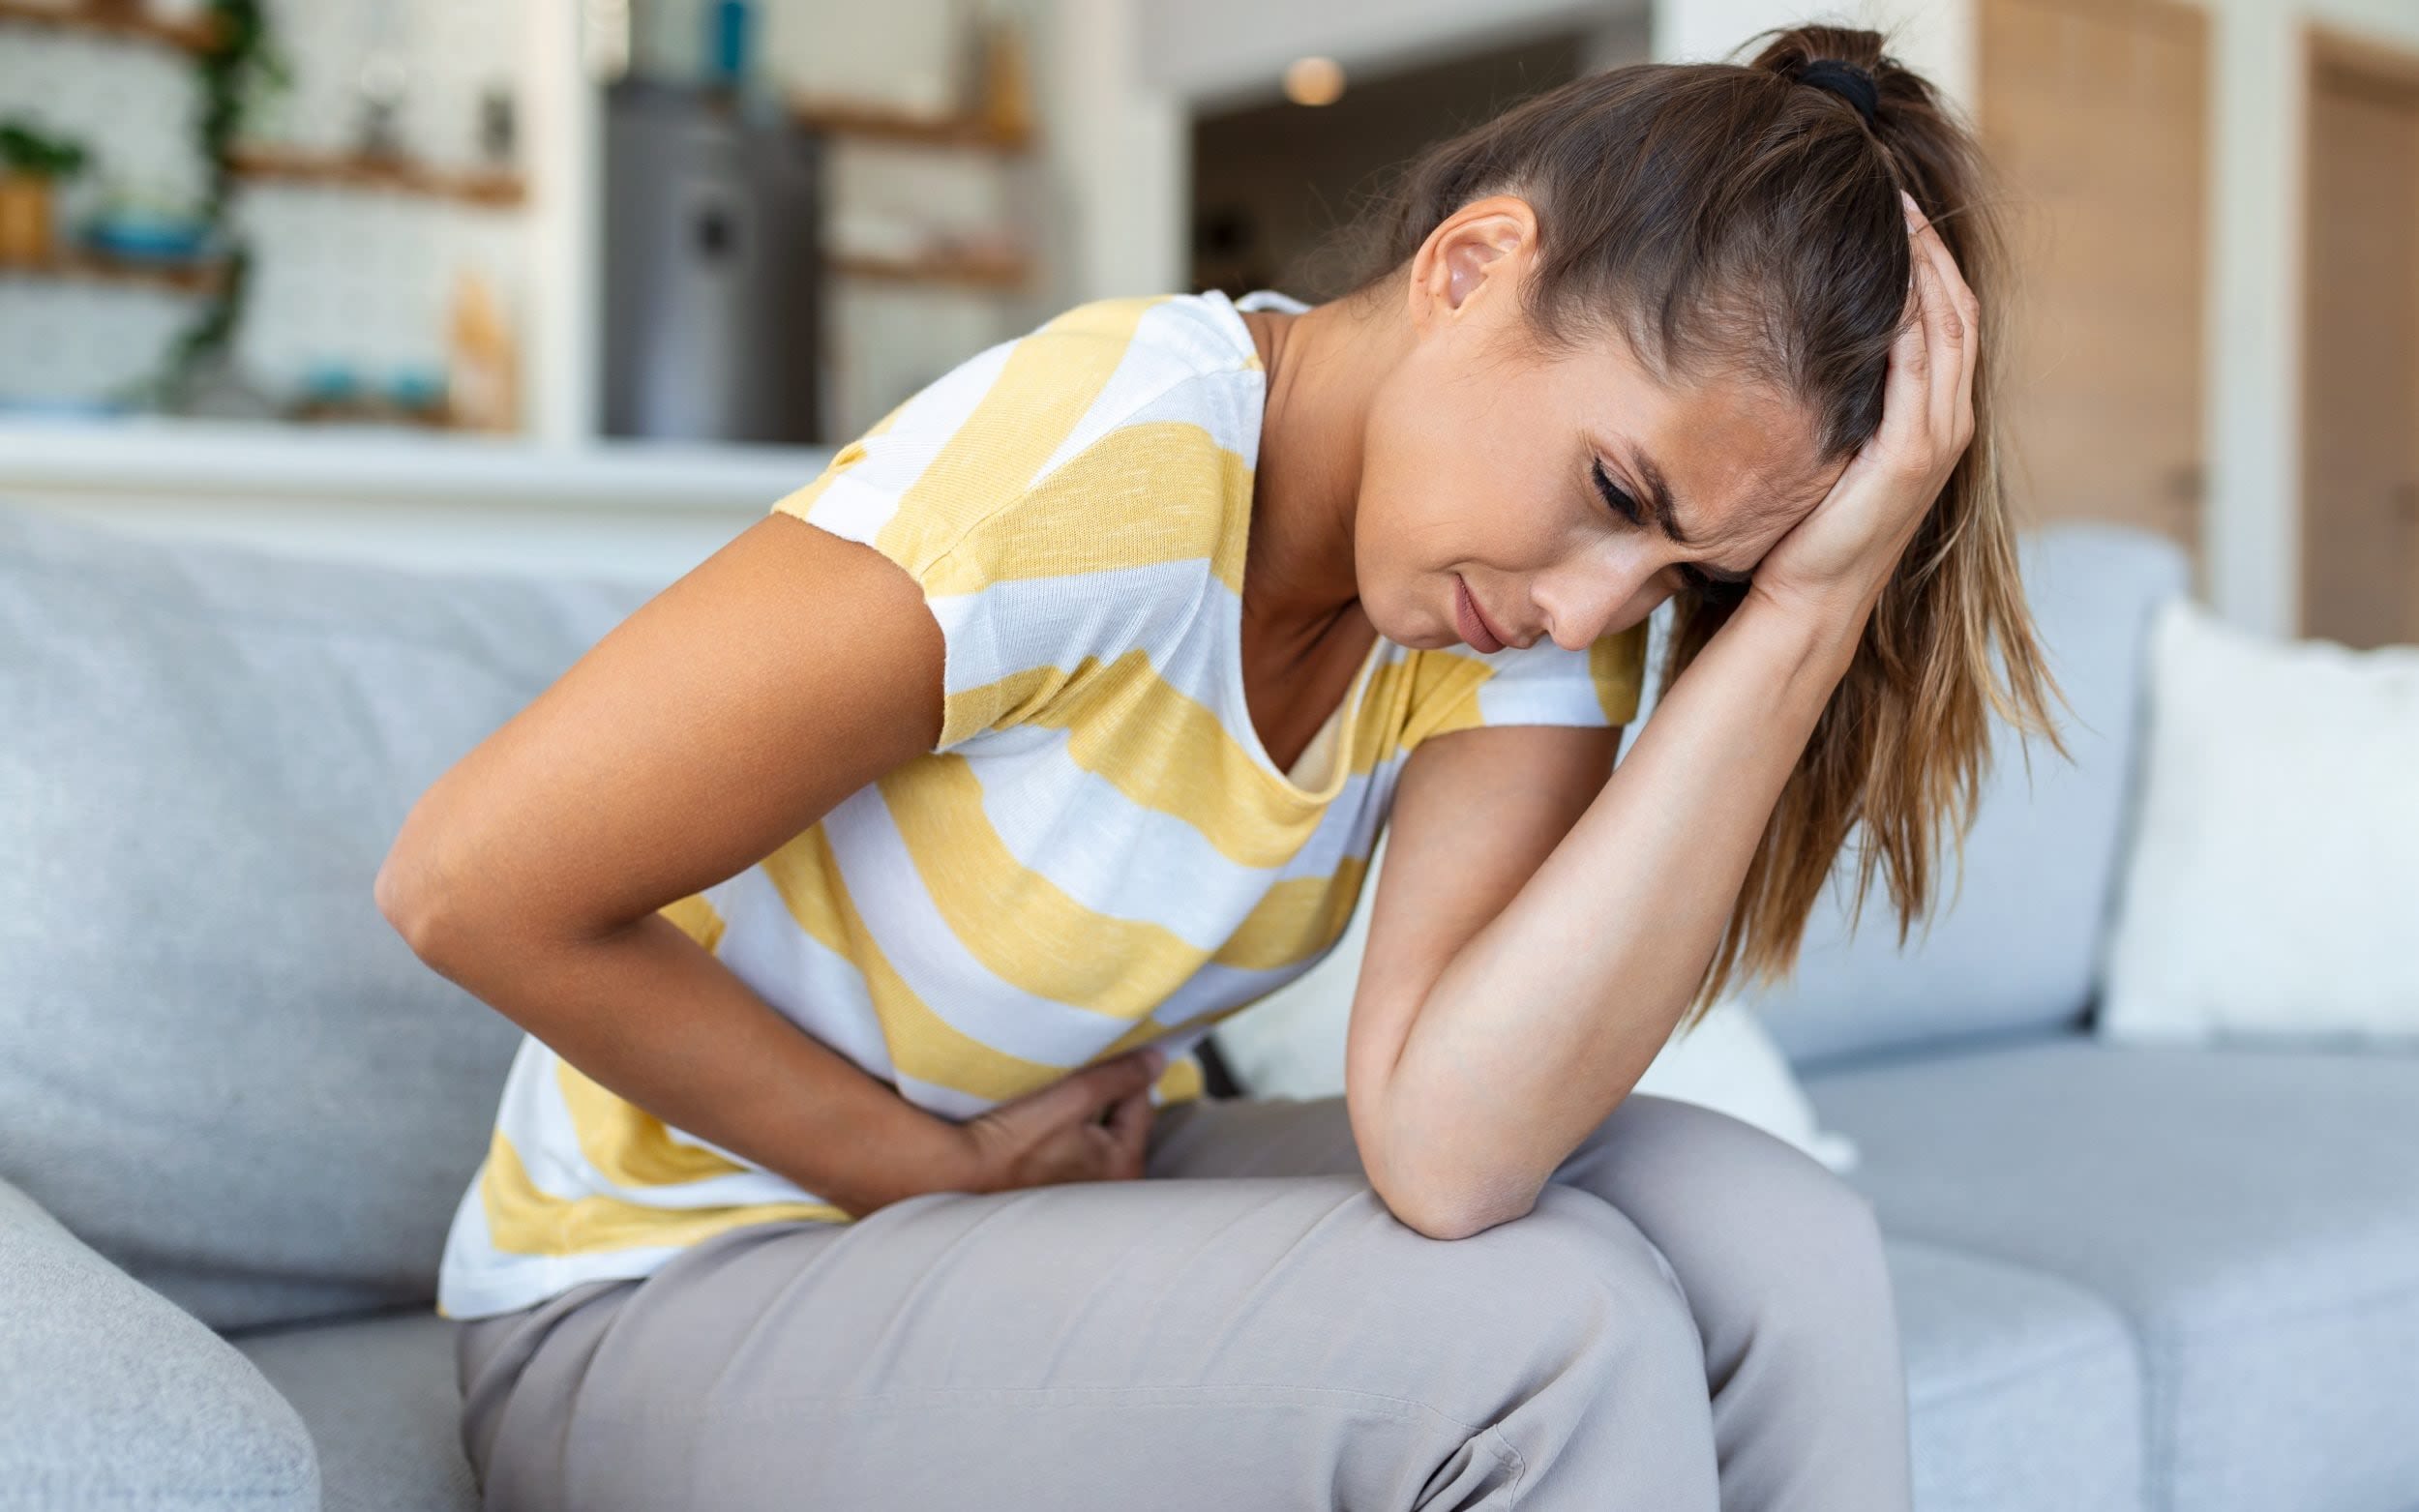 What is ectopic pregnancy and what are the signs and symptoms?